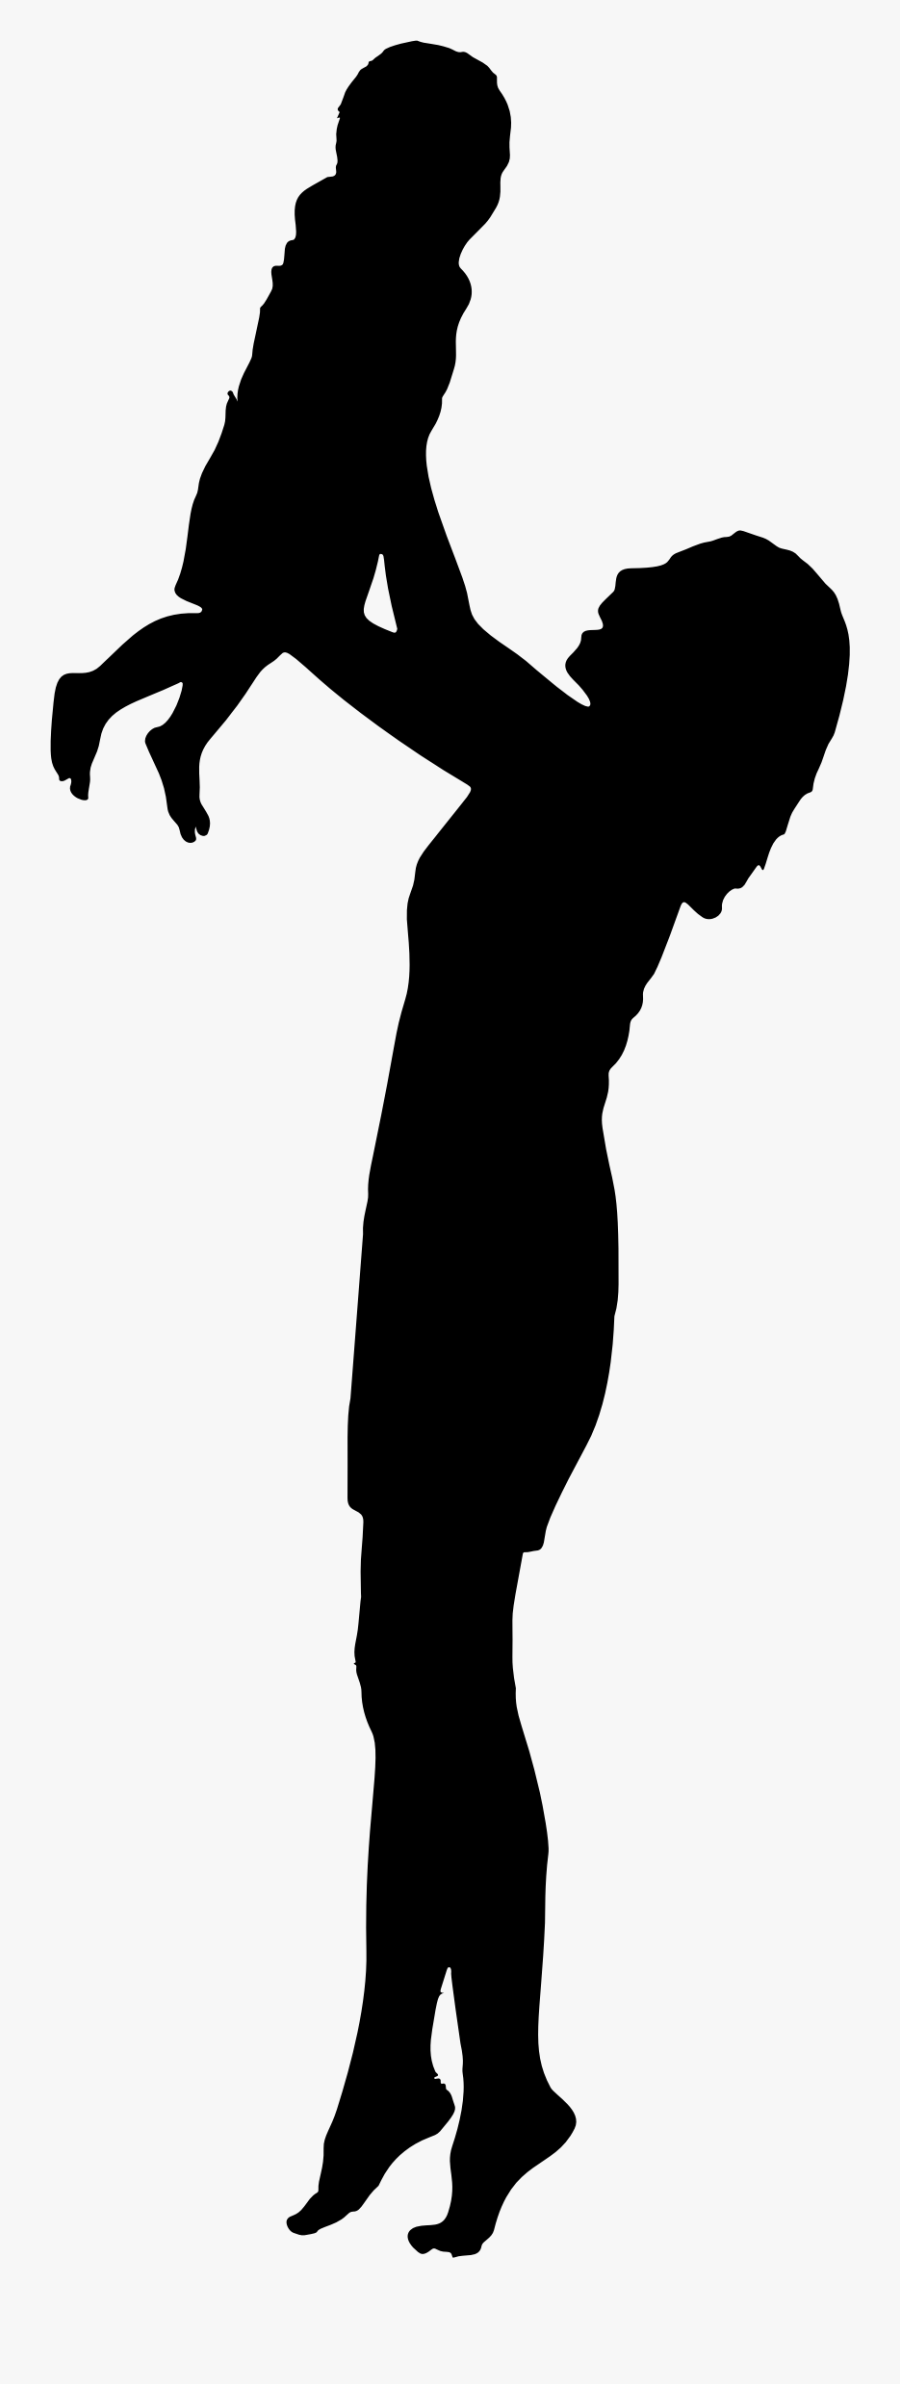 Playing With Infant Big - Woman With Baby Silhouette, Transparent Clipart